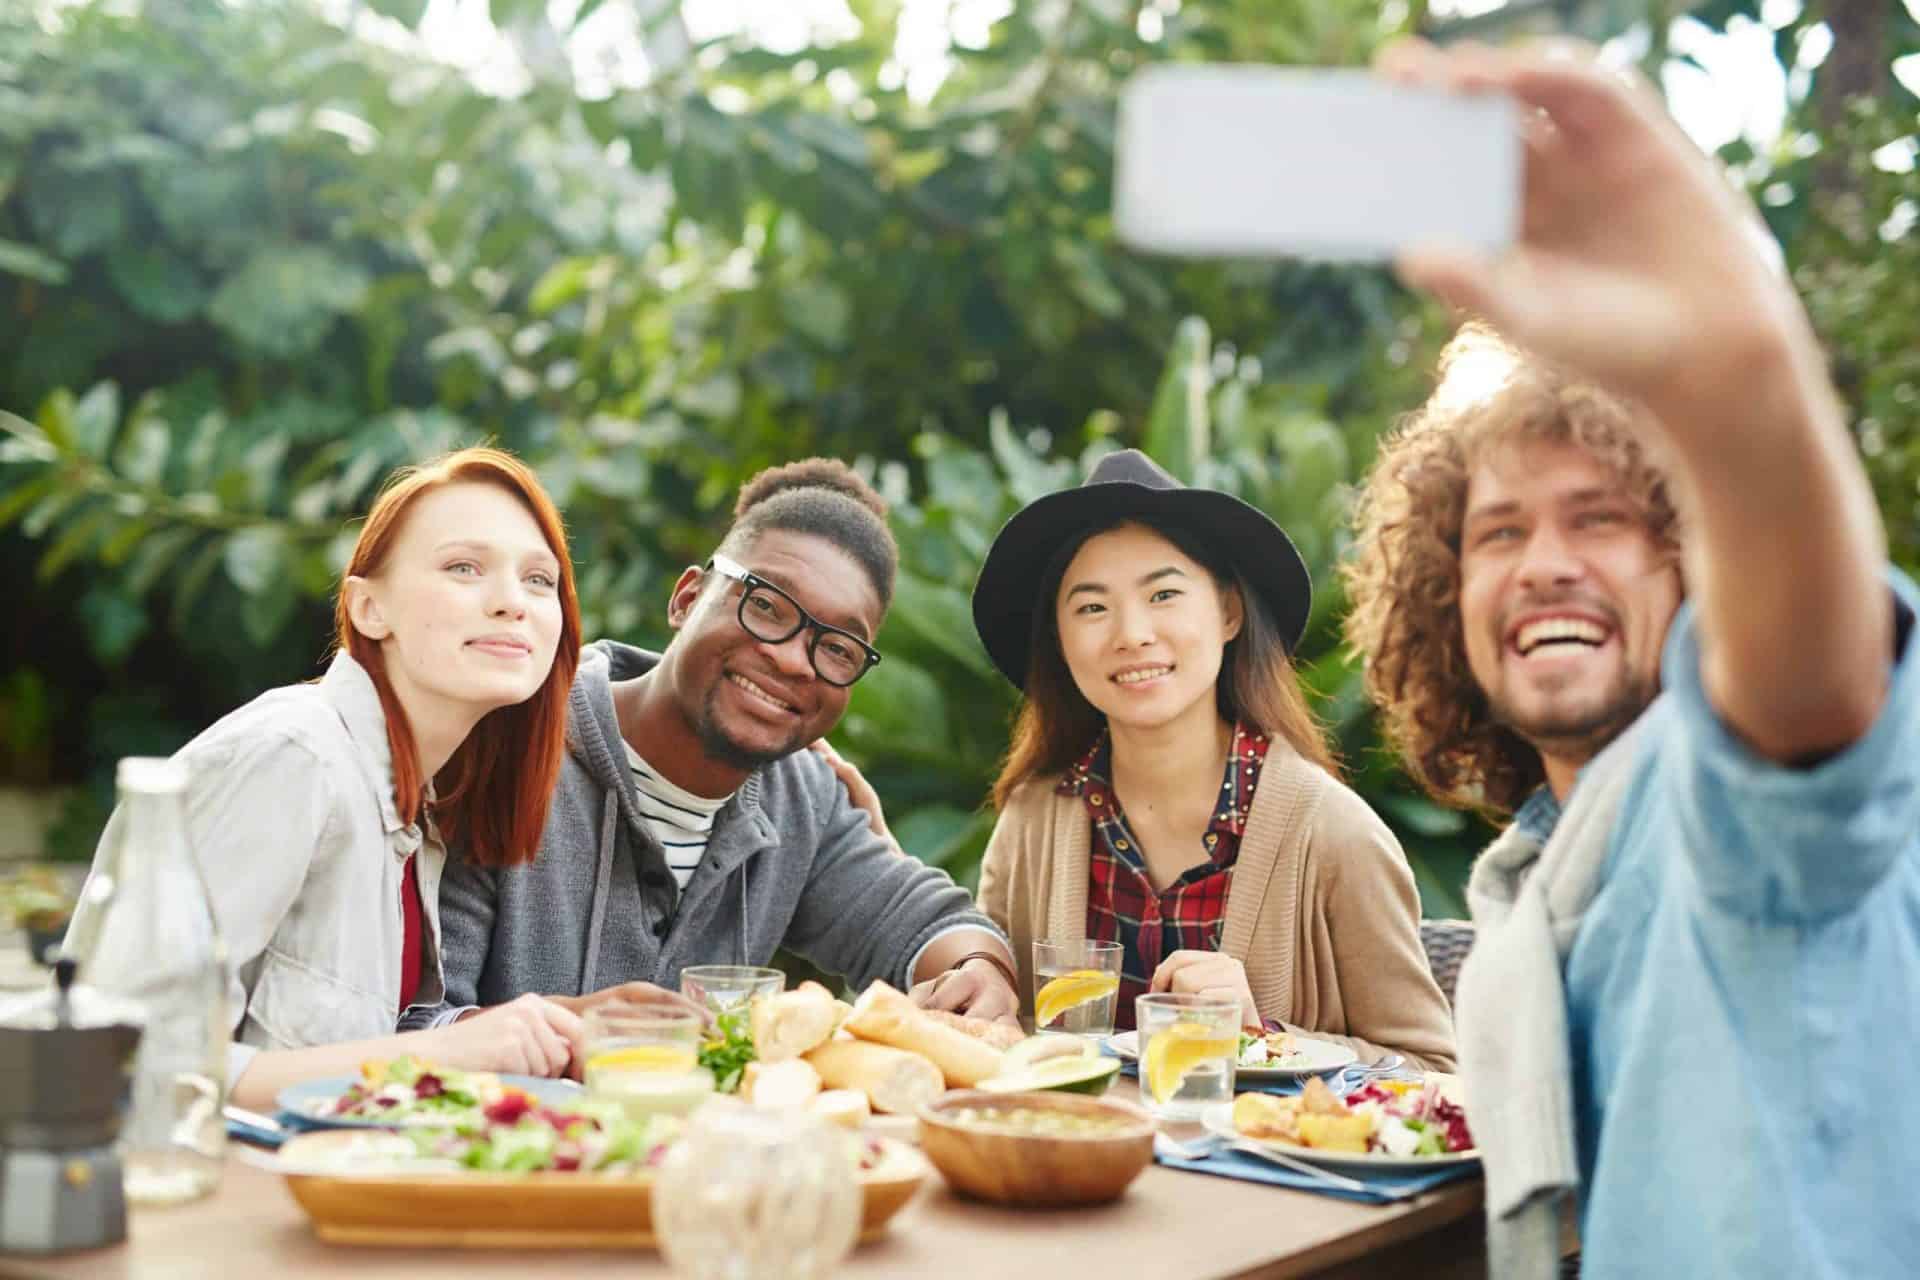 Becoming Vegan, Group of smiling friends taking selfie at outdoor dining table